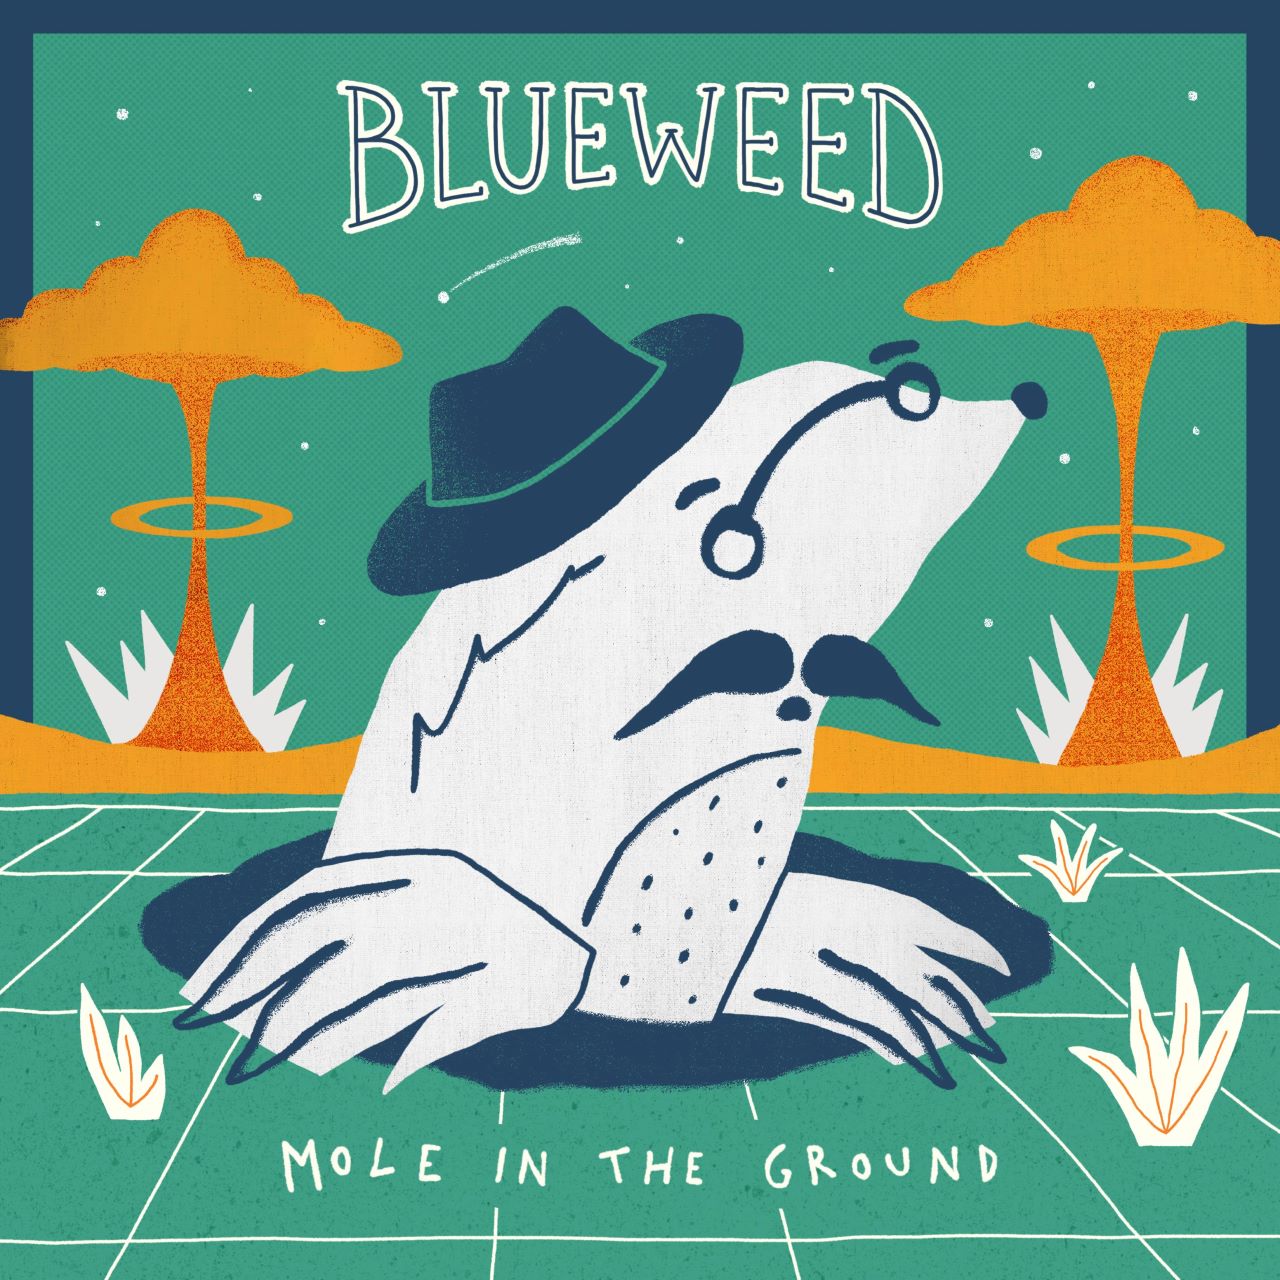 Blue Weed - Mole In The Ground cover album